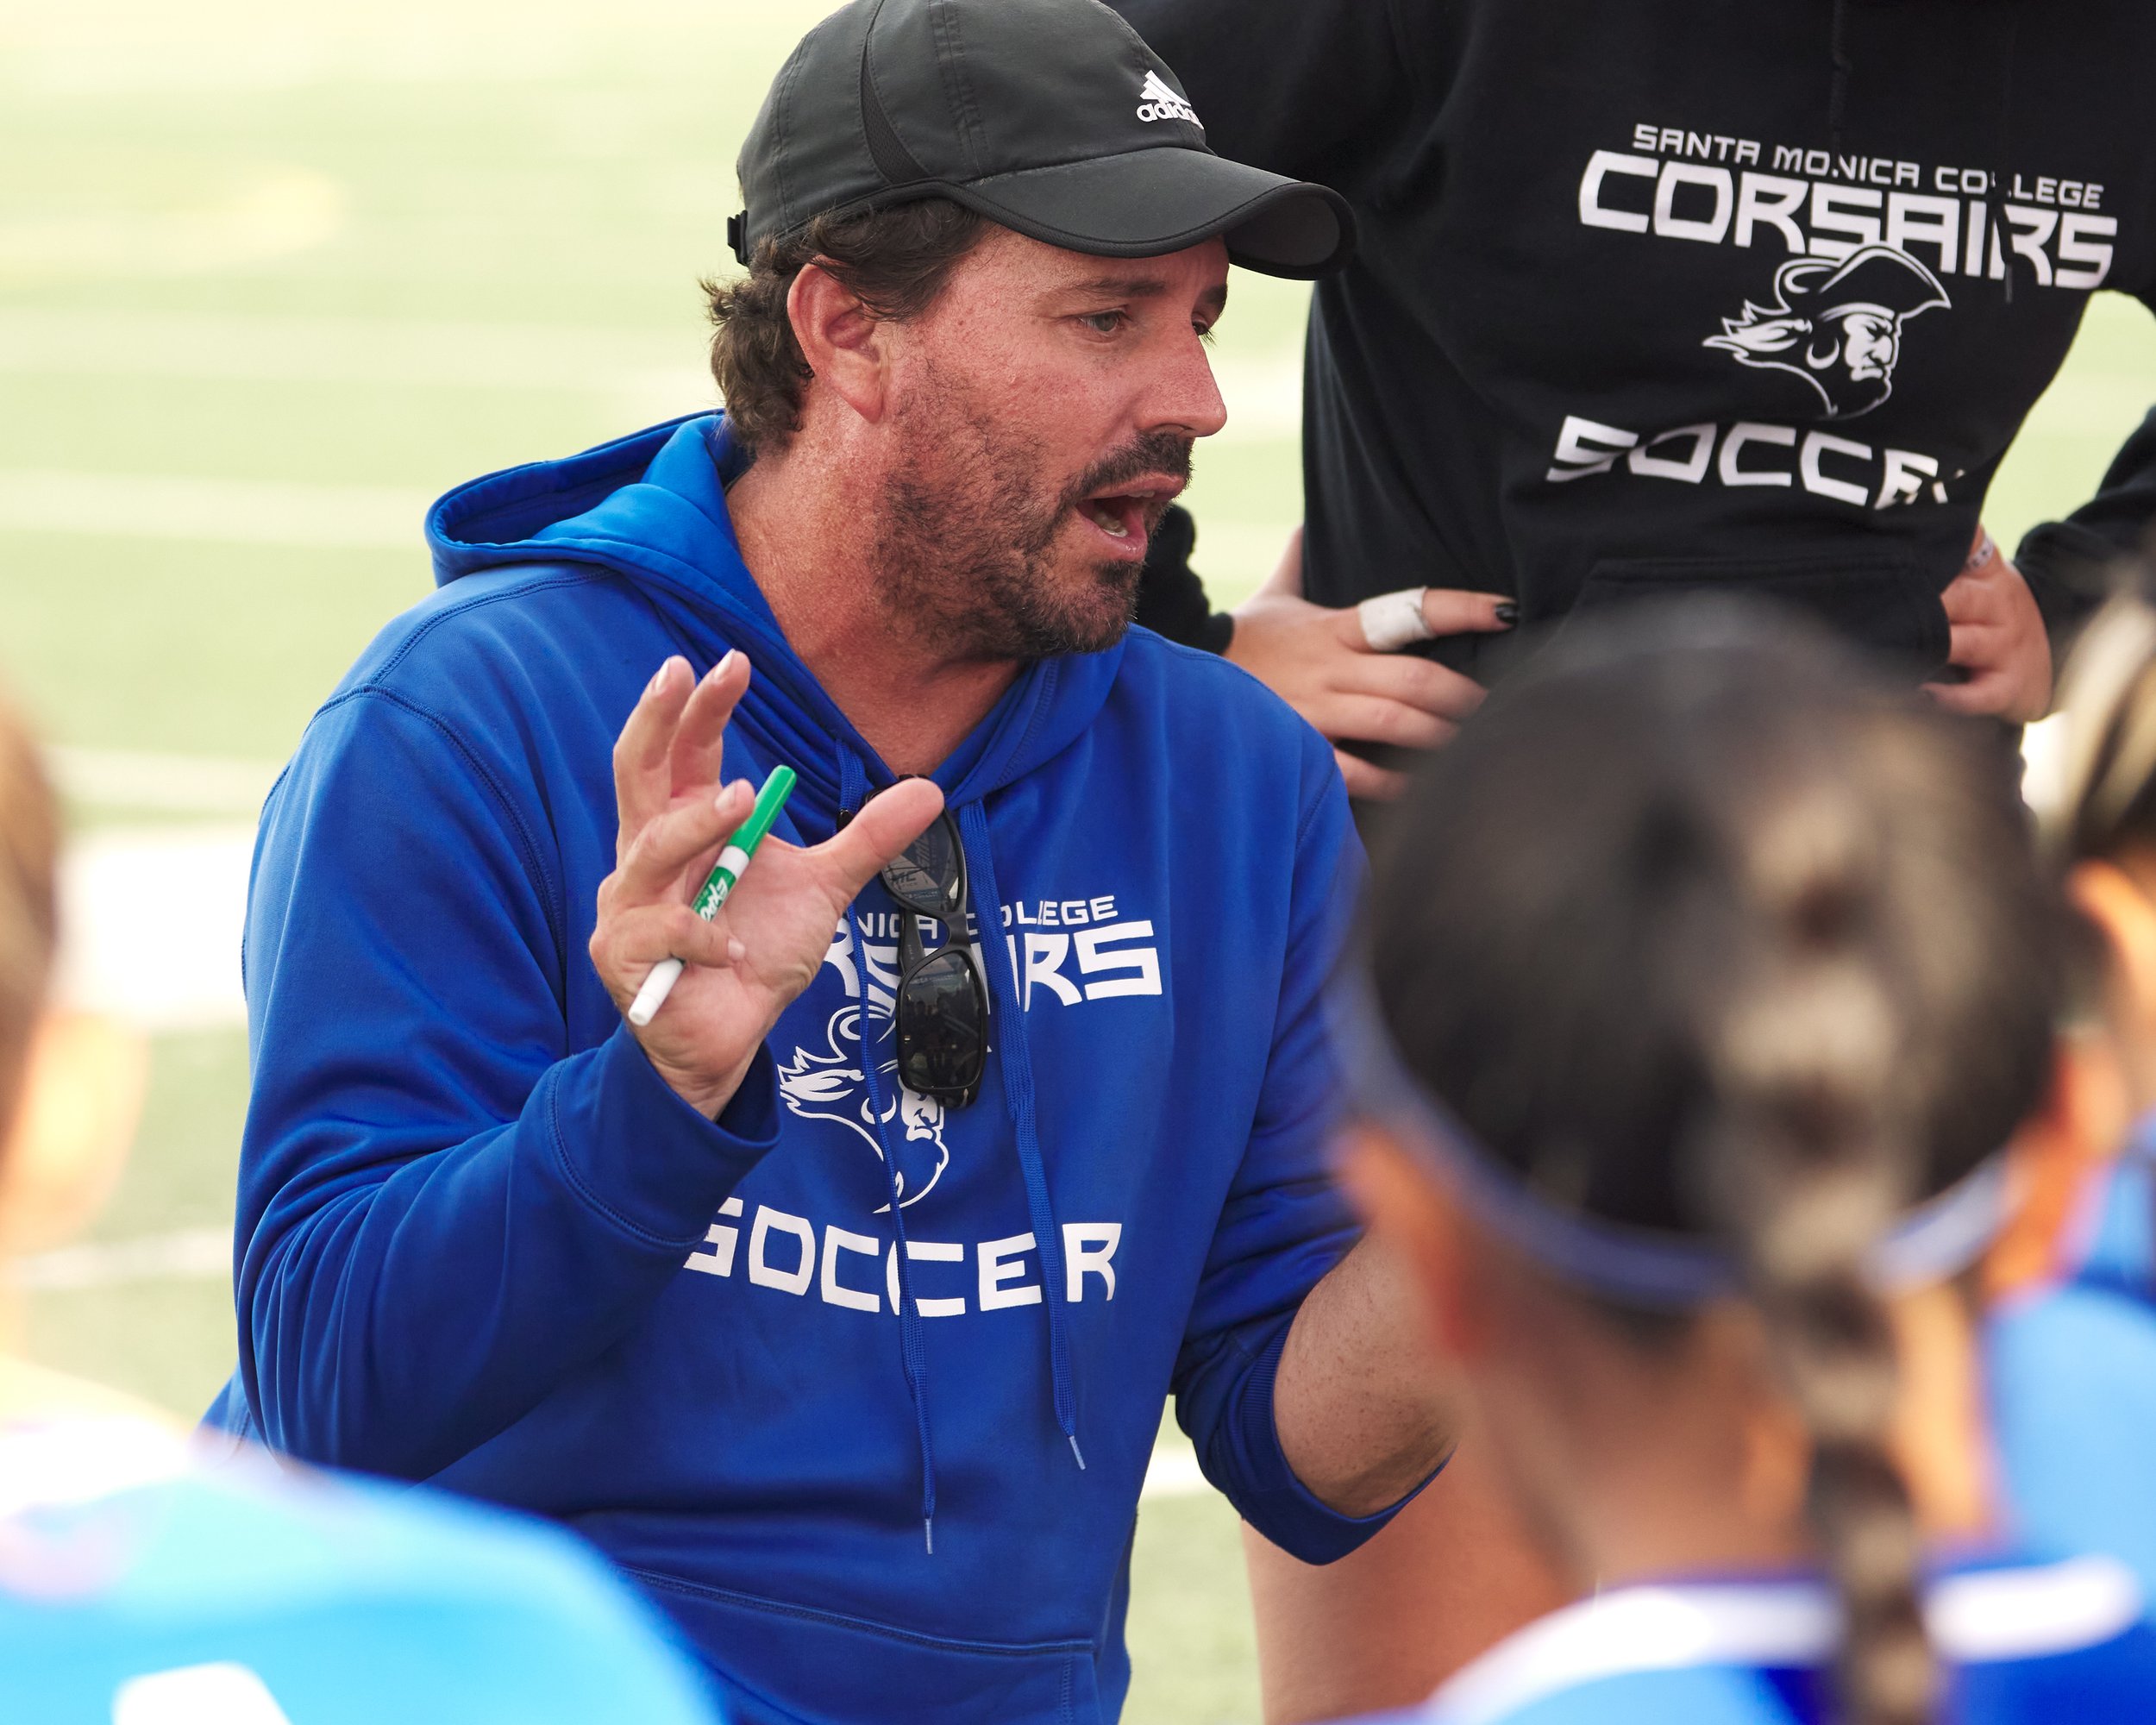  Santa Monica College Corsairs Women's Soccer Head Coach Aaron Benditson during the women's soccer match against the Bakersfield College Renegades on Friday, Oct. 20, 2022, at Corsair Field in Santa Monica, Calif. The Corsairs tied 1-1. (Nicholas McC